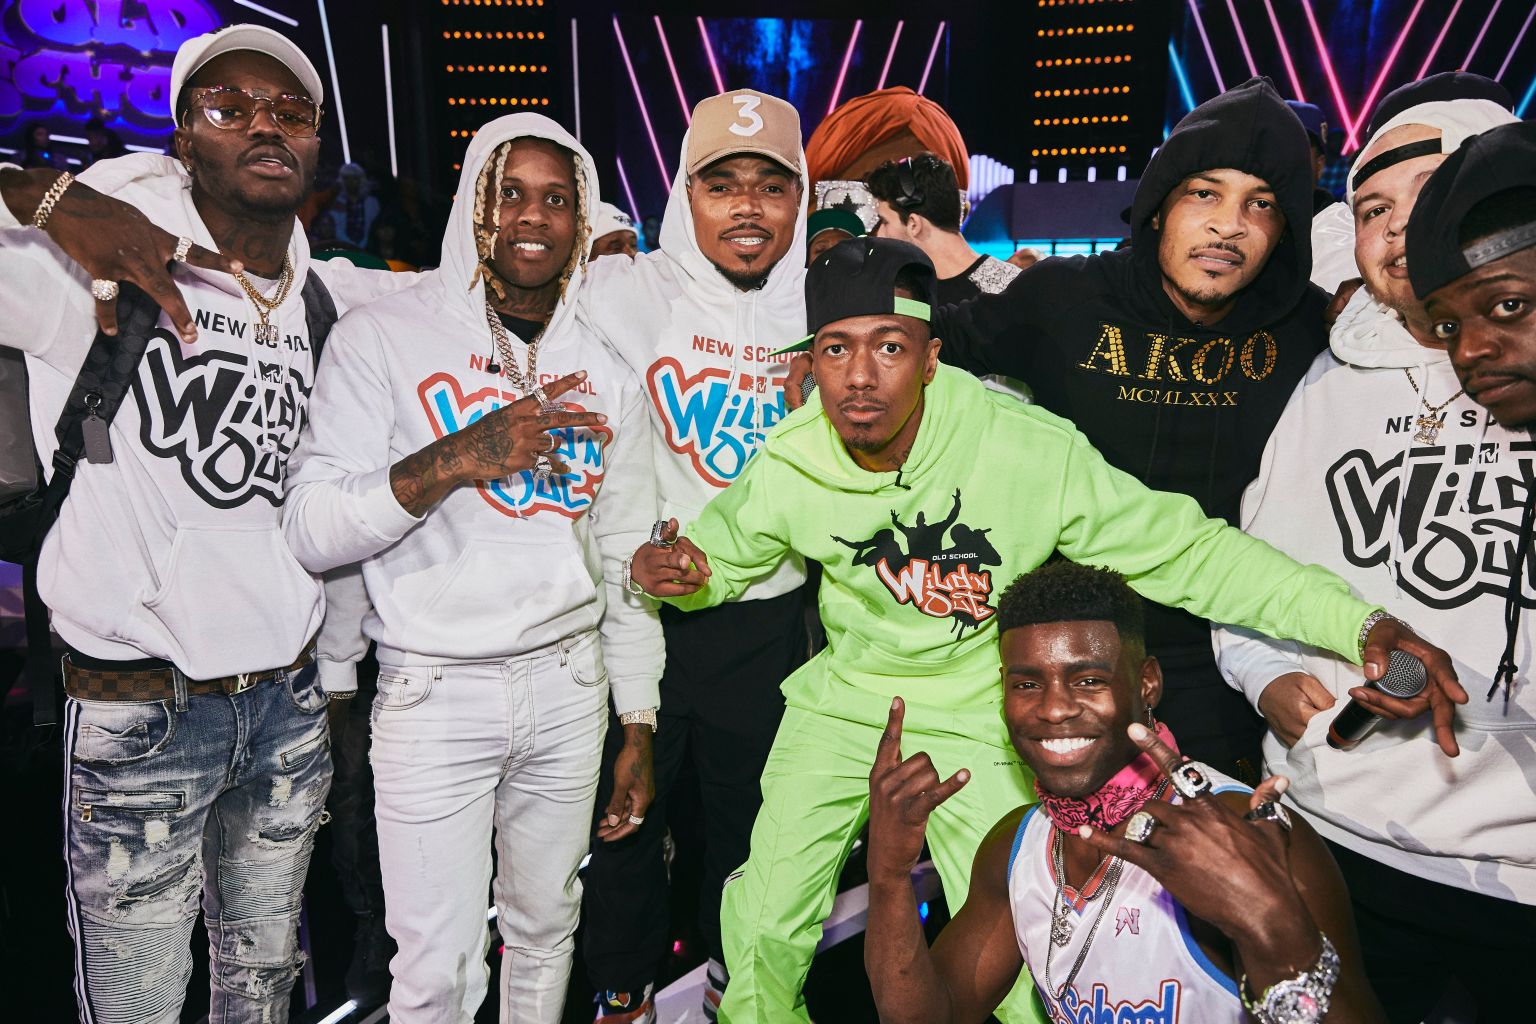 Wild N' Out Returns To VH1 August 10